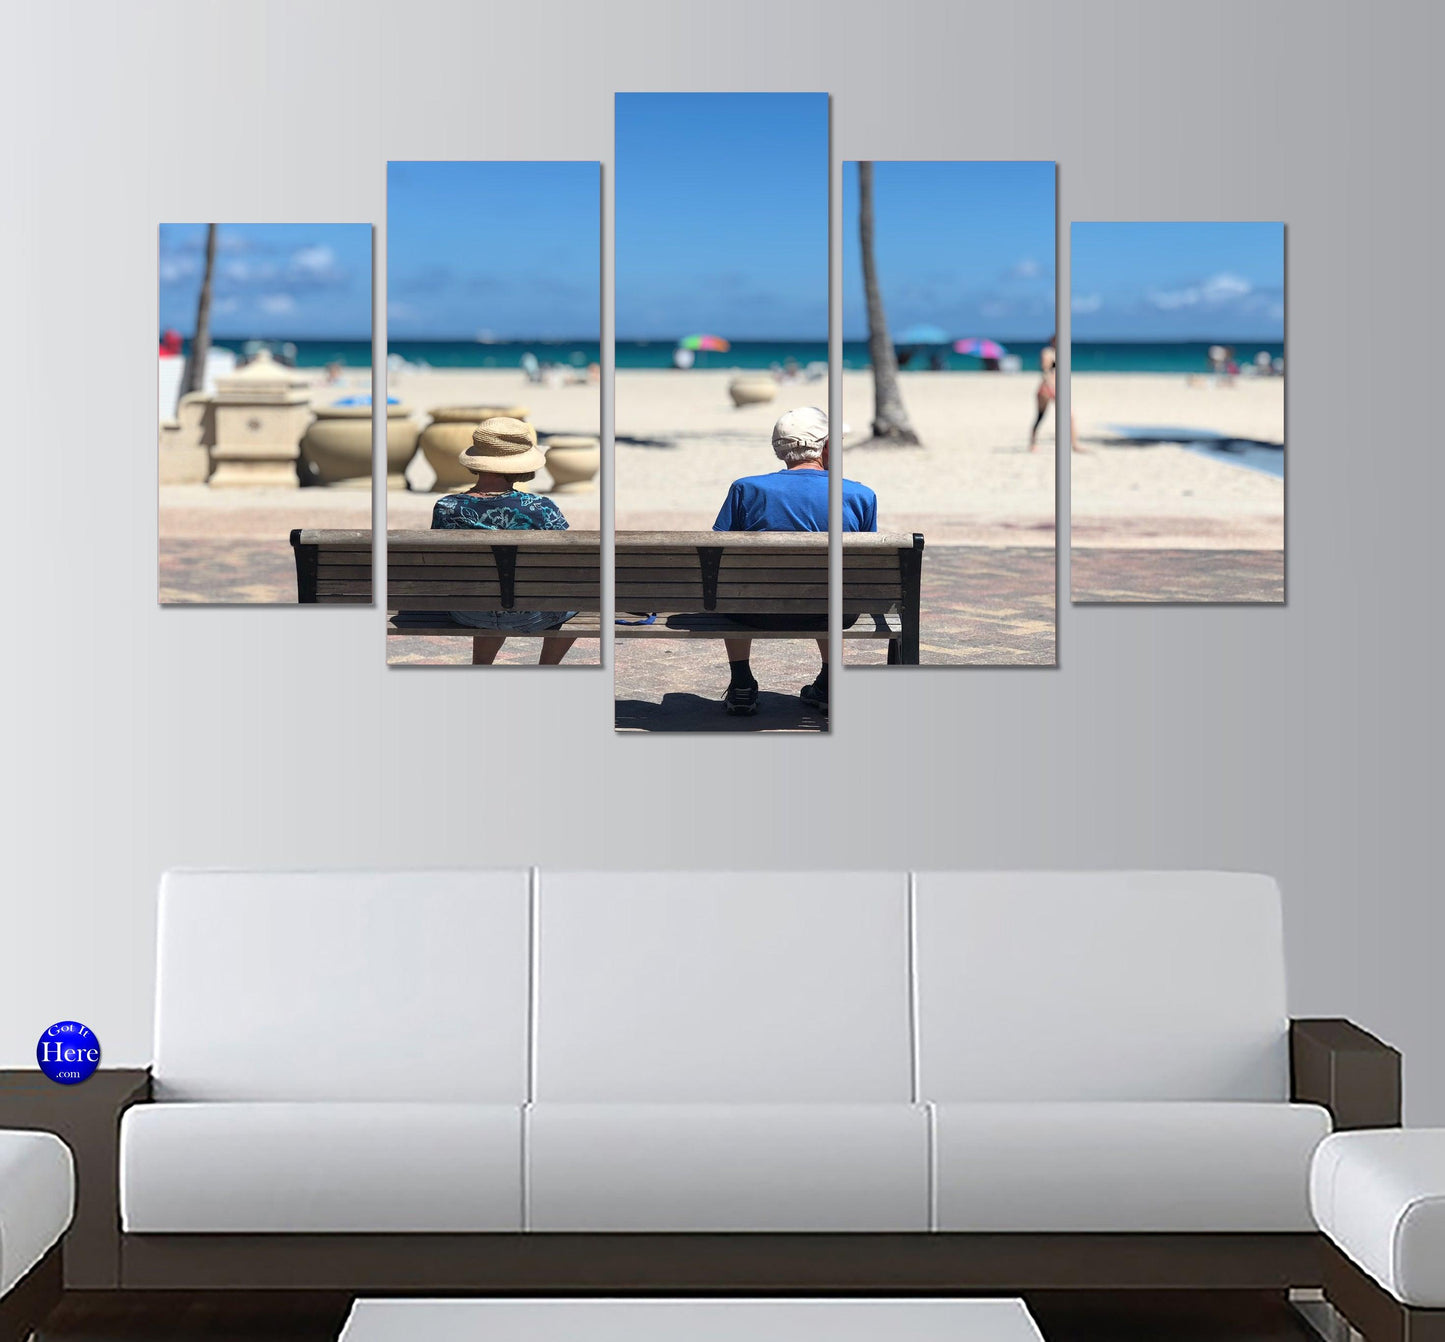 Man And Woman Sitting On Bench South Beach Miami Florida 5 Panel Canvas Print Wall Art - GotItHere.com